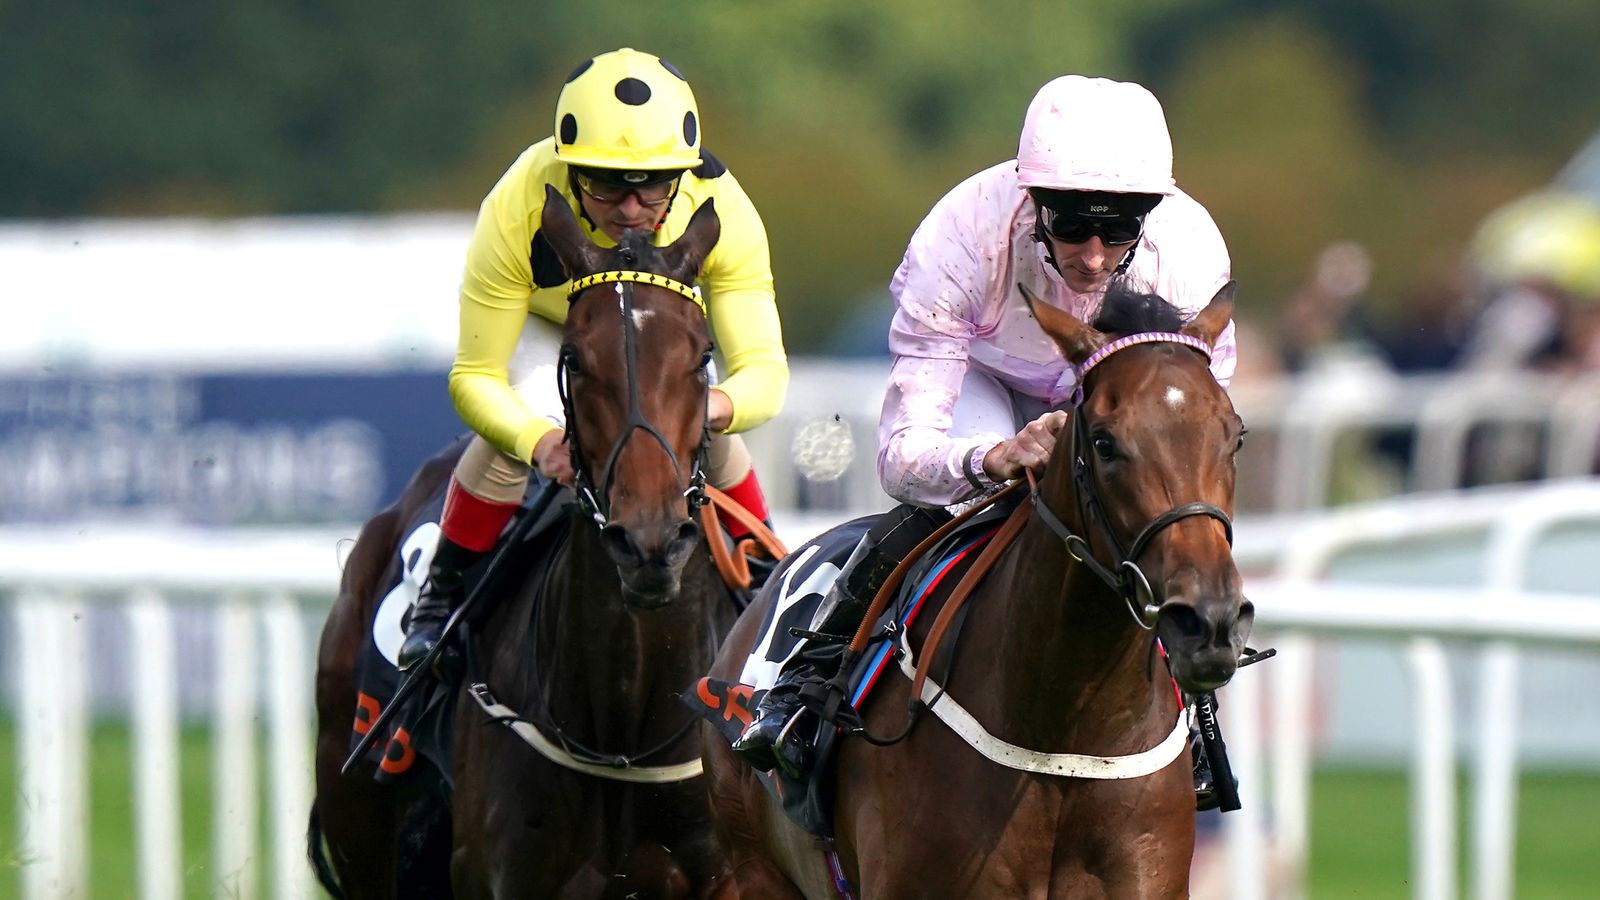 St Leger Festival: Park Hill and May Hill Stakes feature on day two at Doncaster as heavy rain threatens to fall